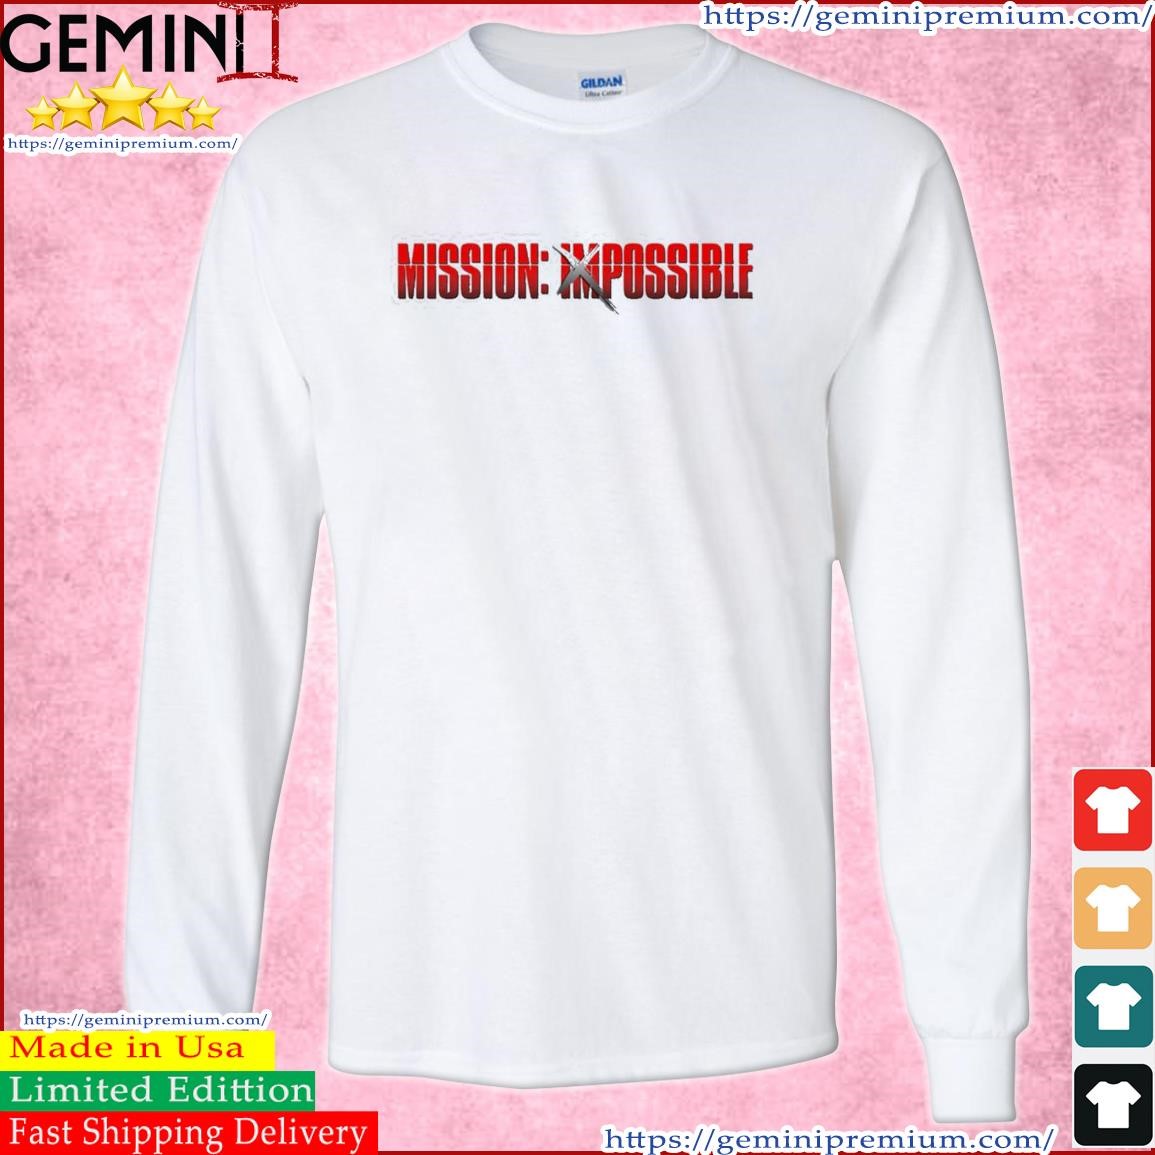 Red Logo Tom Cruise Mission Possible Shirt Long Sleeve Tee.jpg